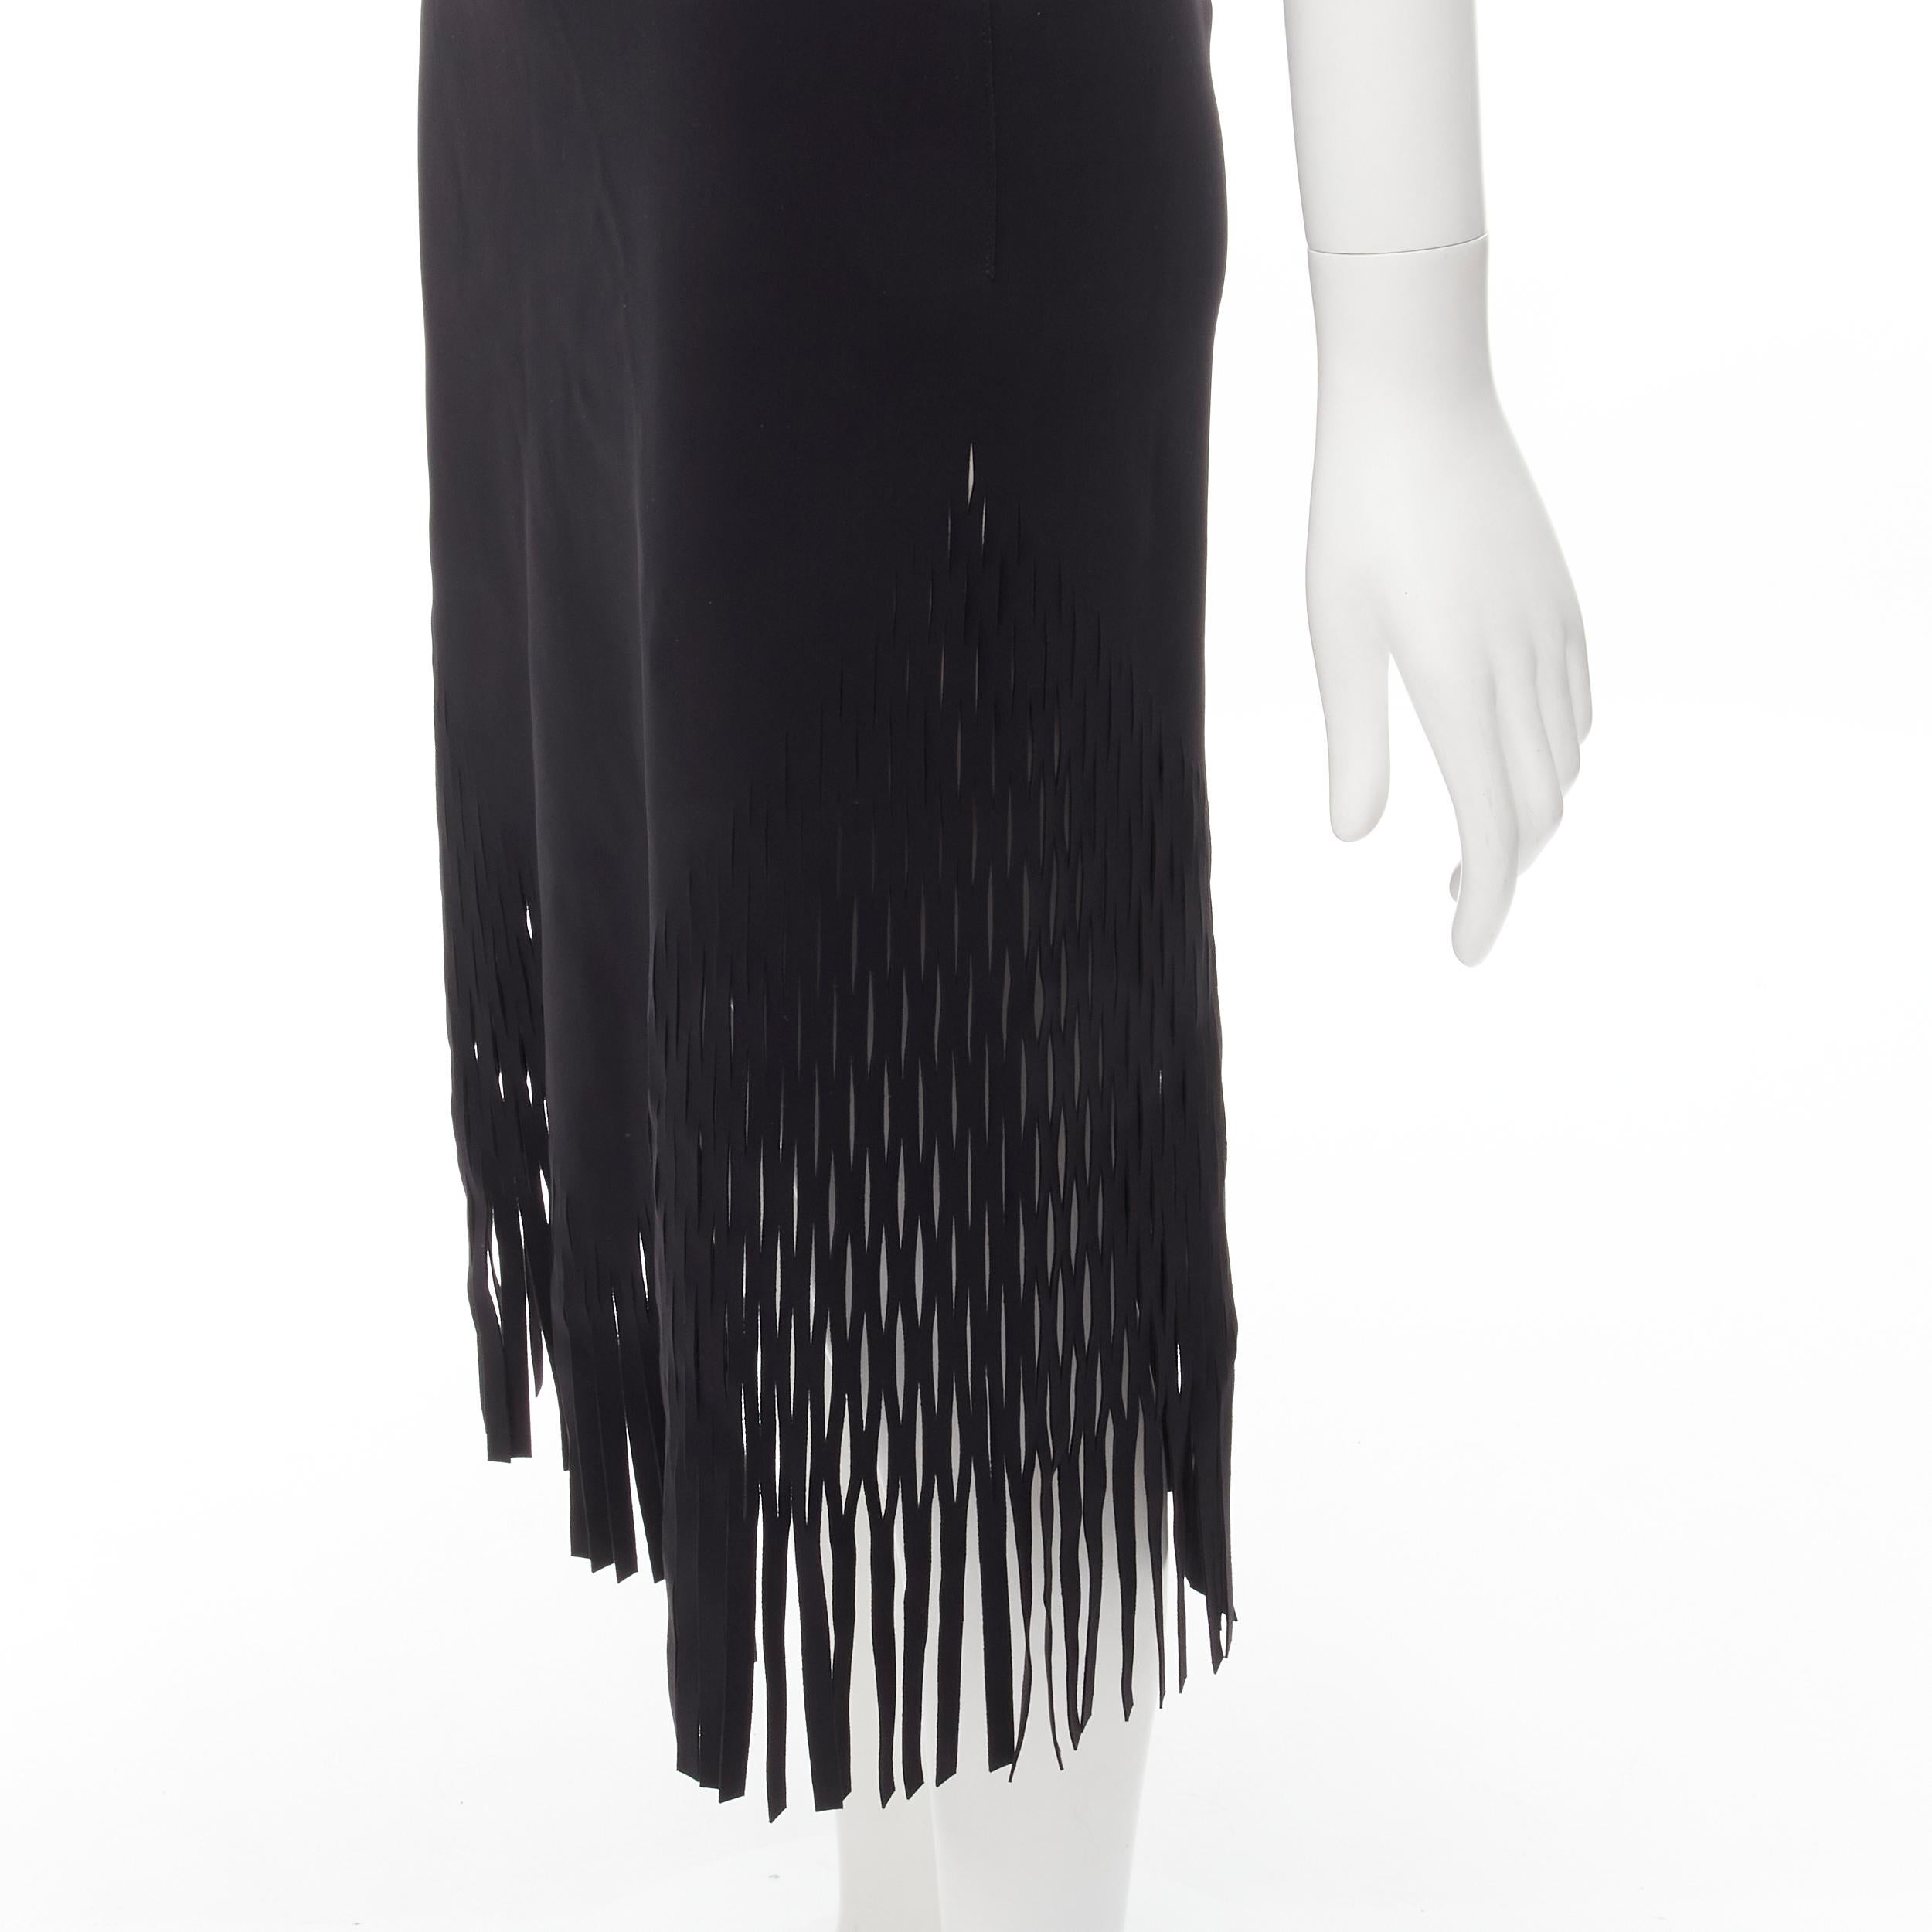 DION LEE Runway laser cut perforated fringe midi skirt S 
Reference: ANWU/A00532 
Brand: Dion Lee 
Color: Black 
Pattern: Solid 
Extra Detail: Silver-tone zip back closure 

CONDITION: 
Condition: Excellent, this item was pre-owned and is in